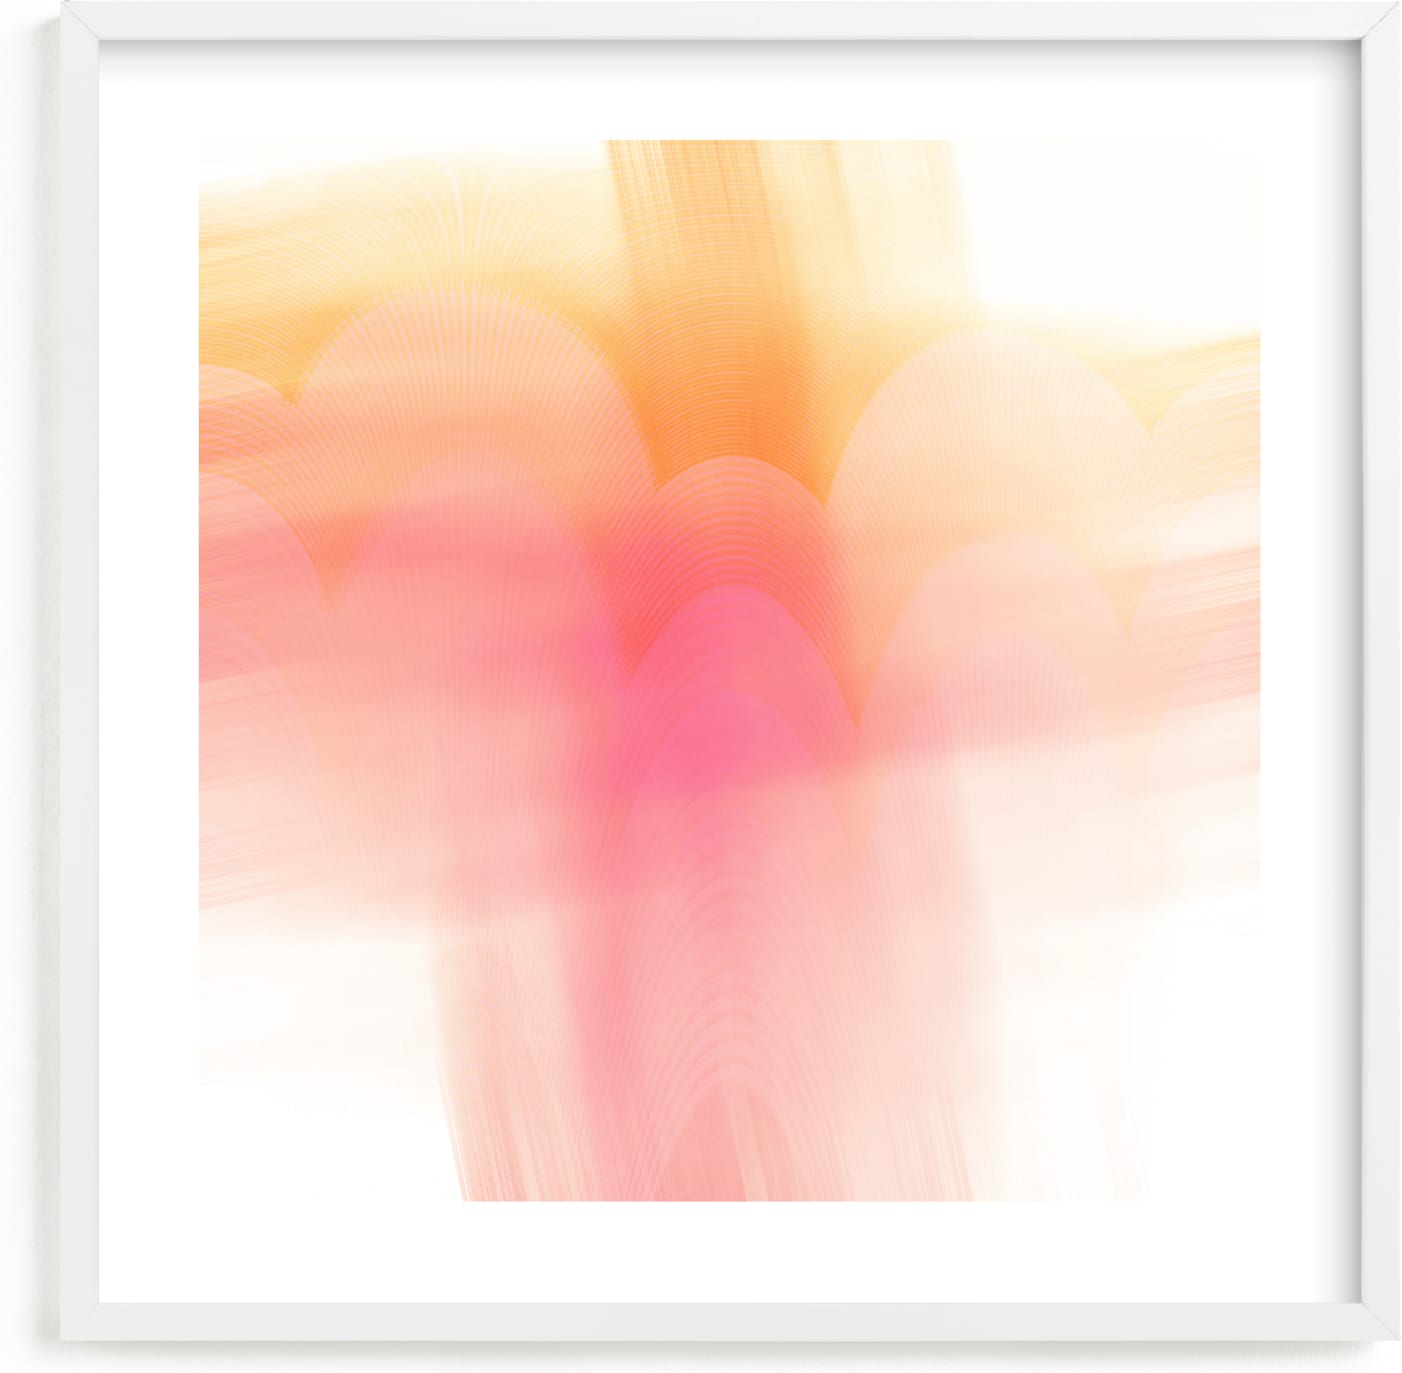 This is a pink kids wall art by Debra Pruskowski called Hello Sunrise.